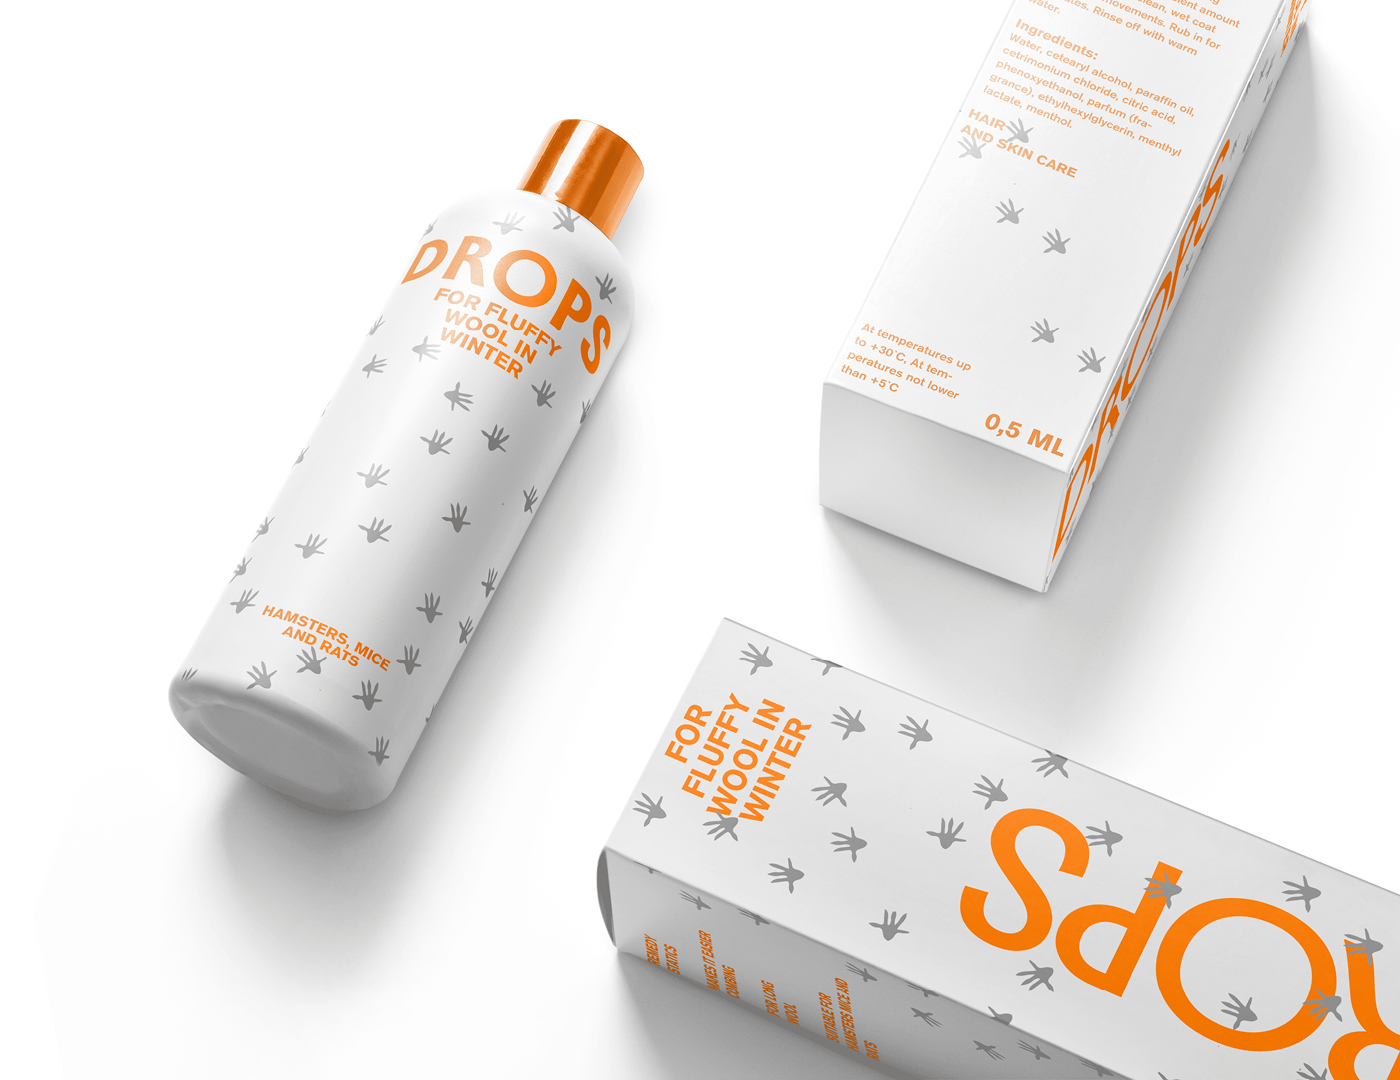 Student Packaging Design Concept for Drops Pet Products